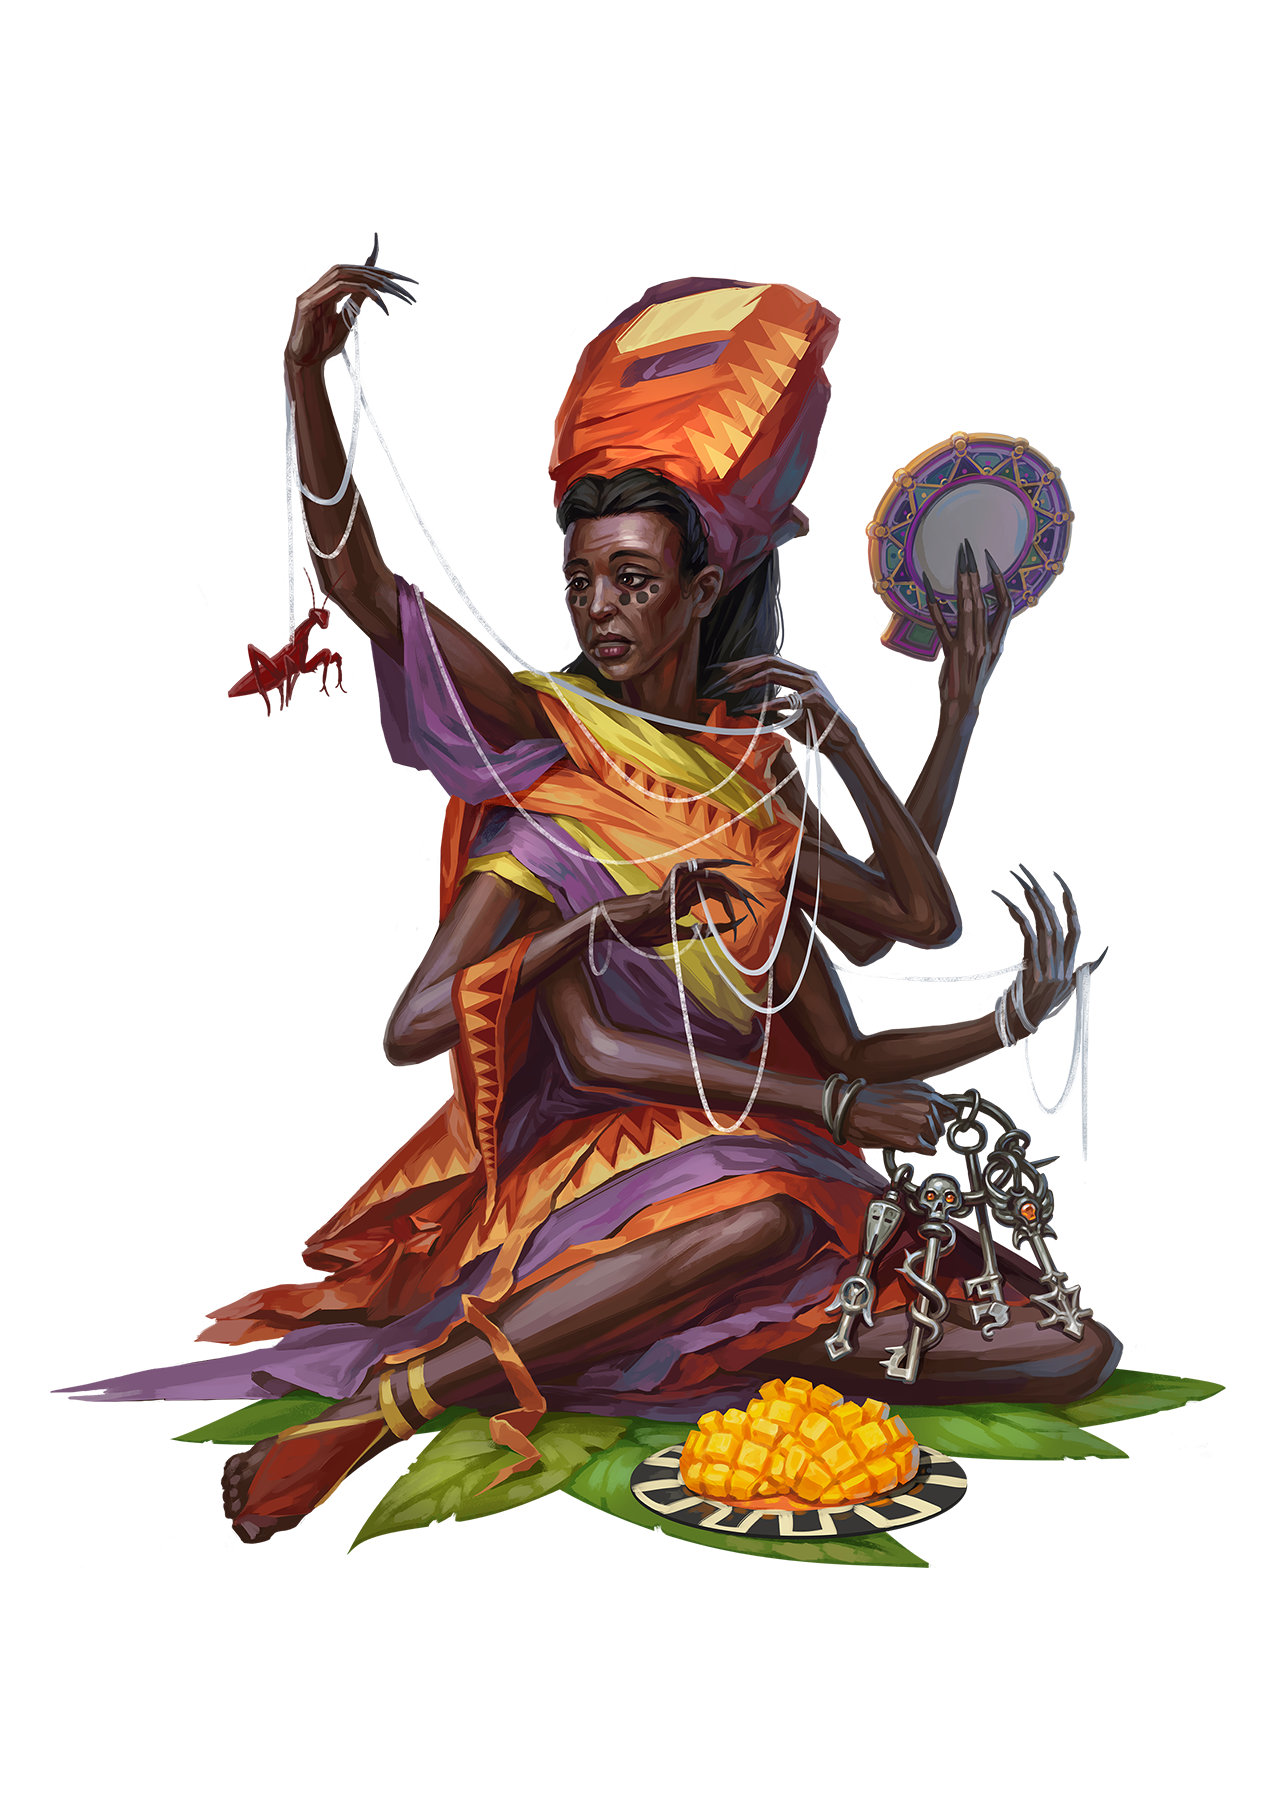 Grandmother Spider, A dark skinned woman, dressed in brightly colored robes, holding multiple threads